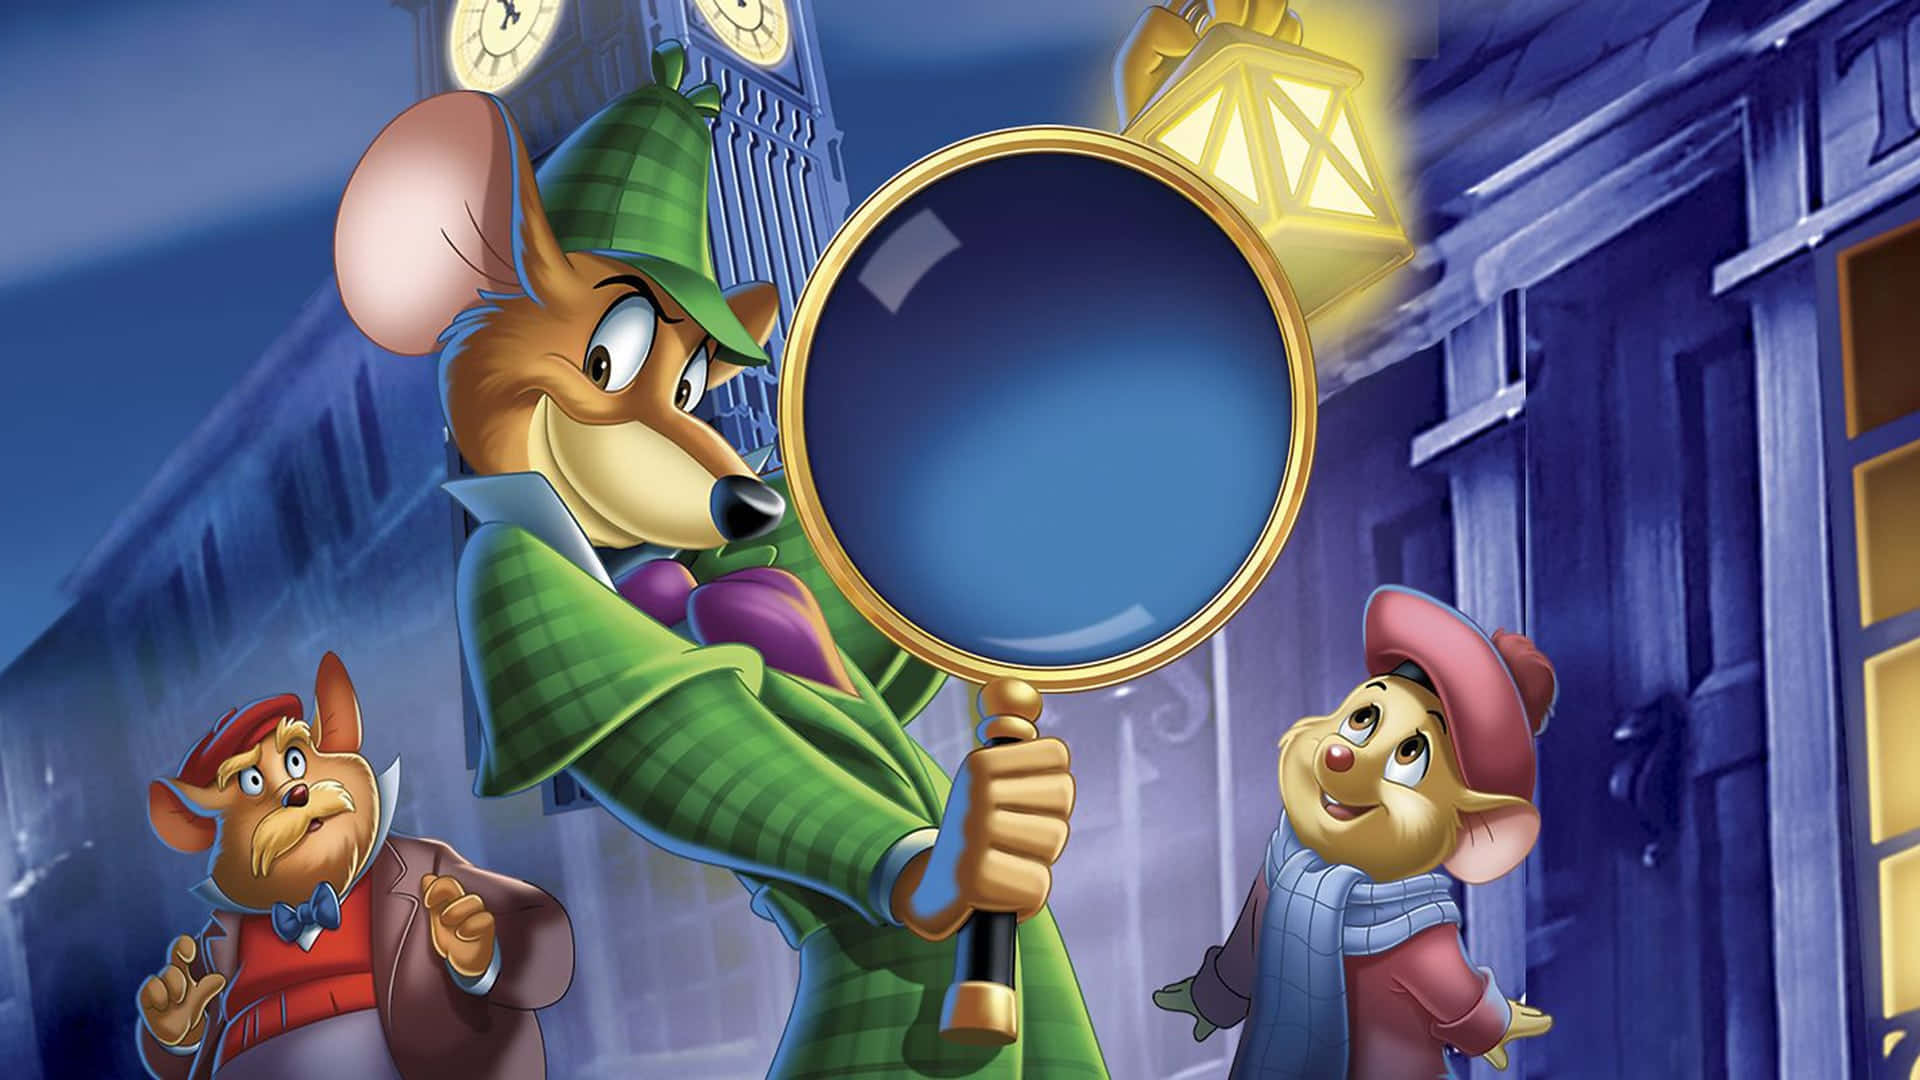 The Great Mouse Detective Wallpaper